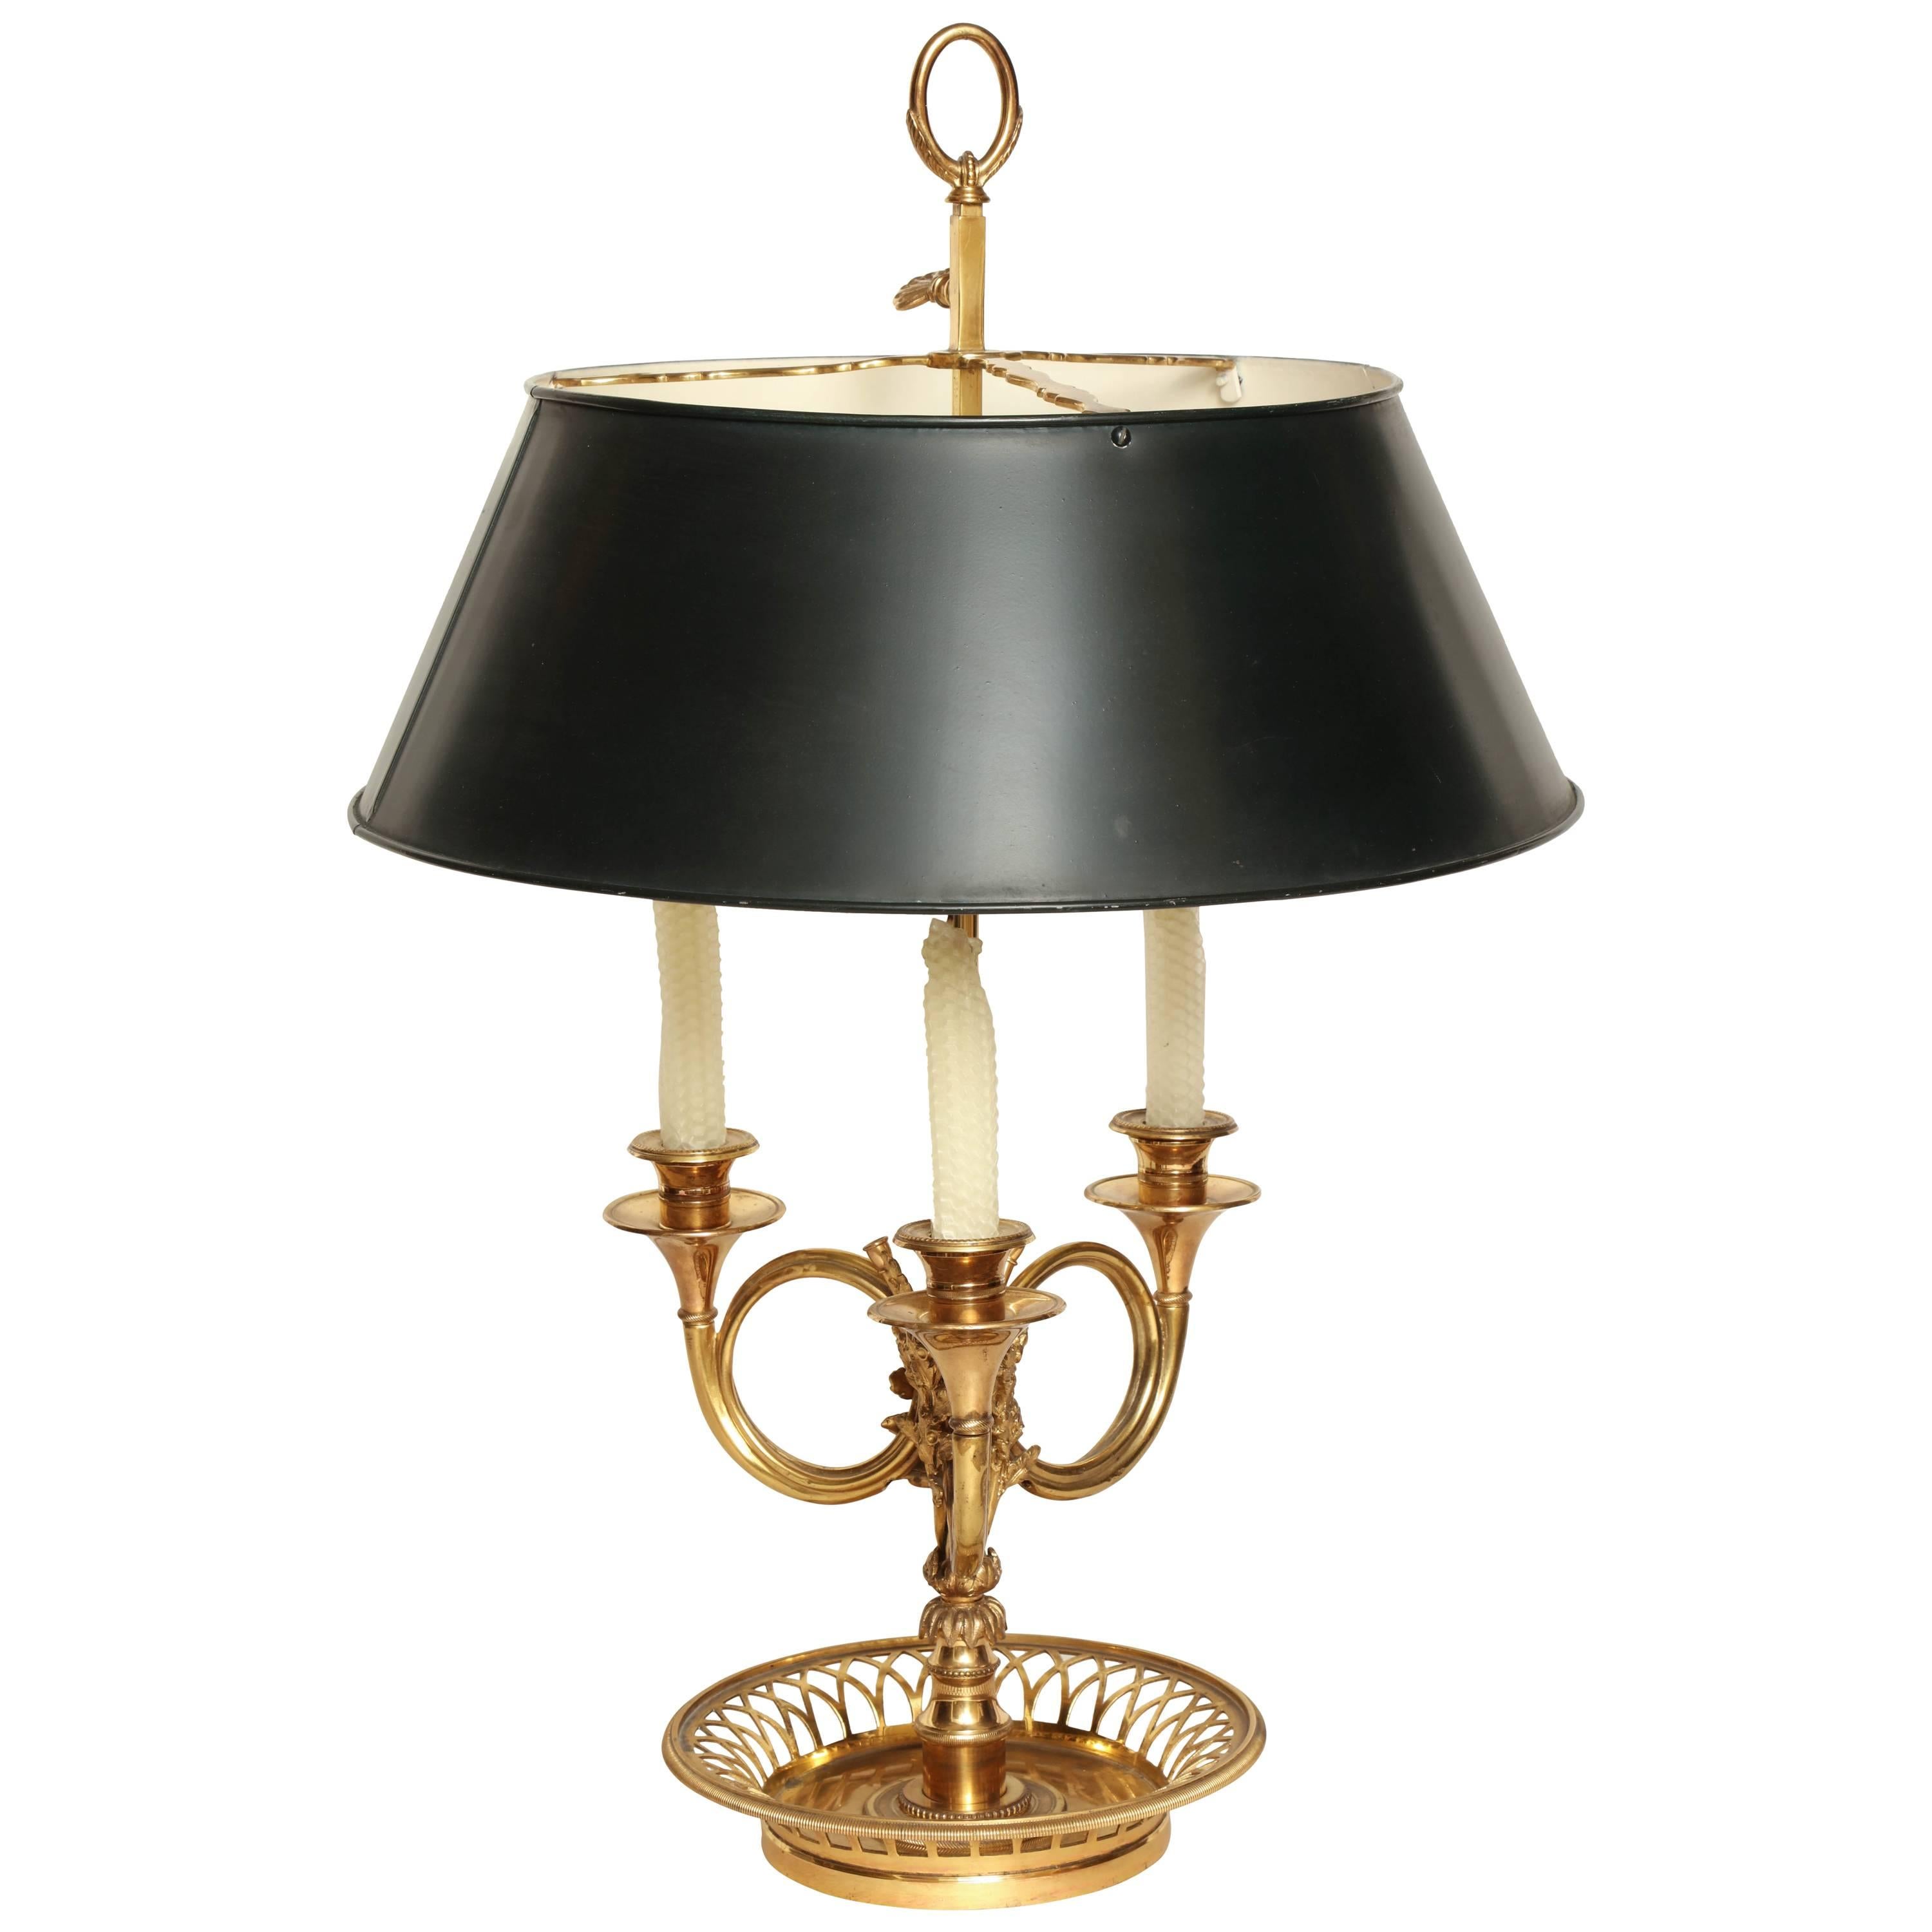 Brass Bouillotte Two-Light Table Lamp with Tole Shade